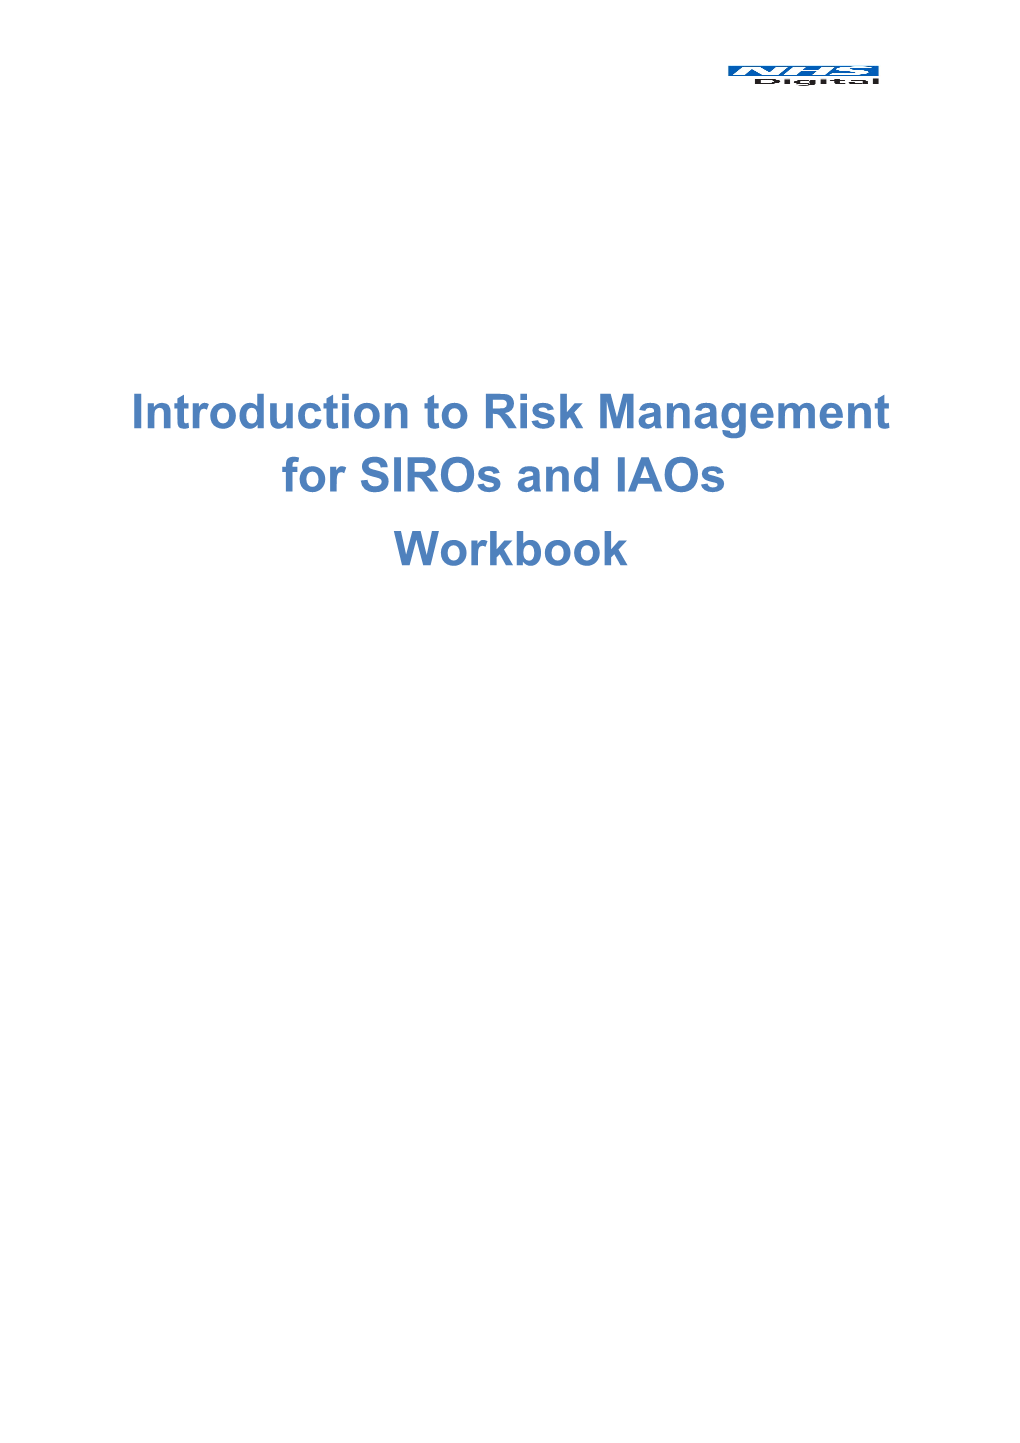 Introduction to Risk Management for Siros and Iaos